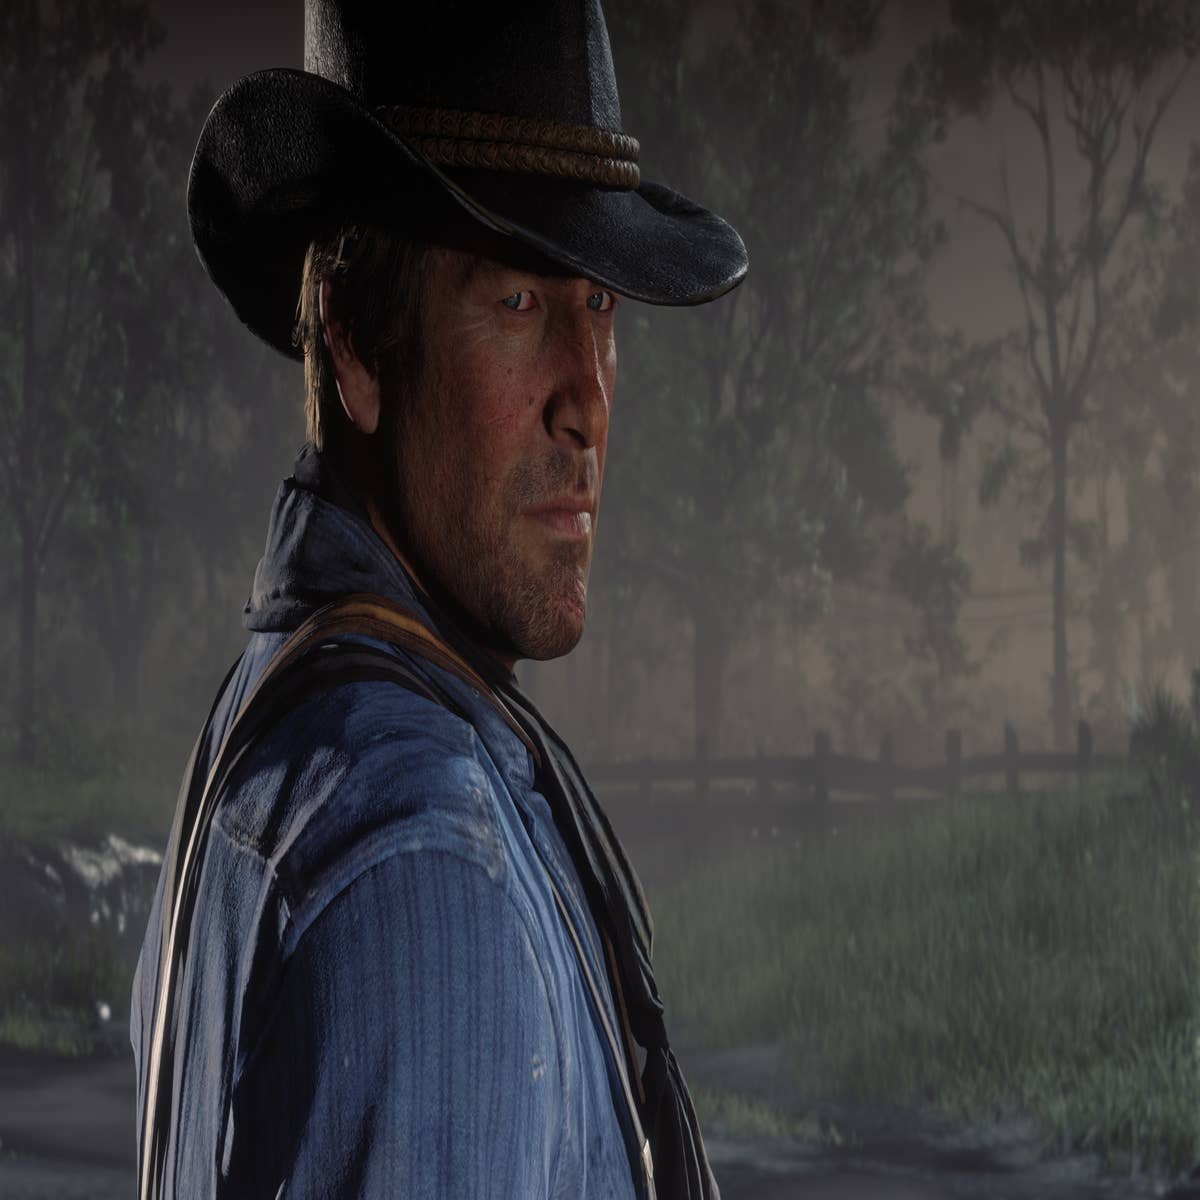 Take-Two won't be pinned down on a Red Dead Redemption 2 PC release